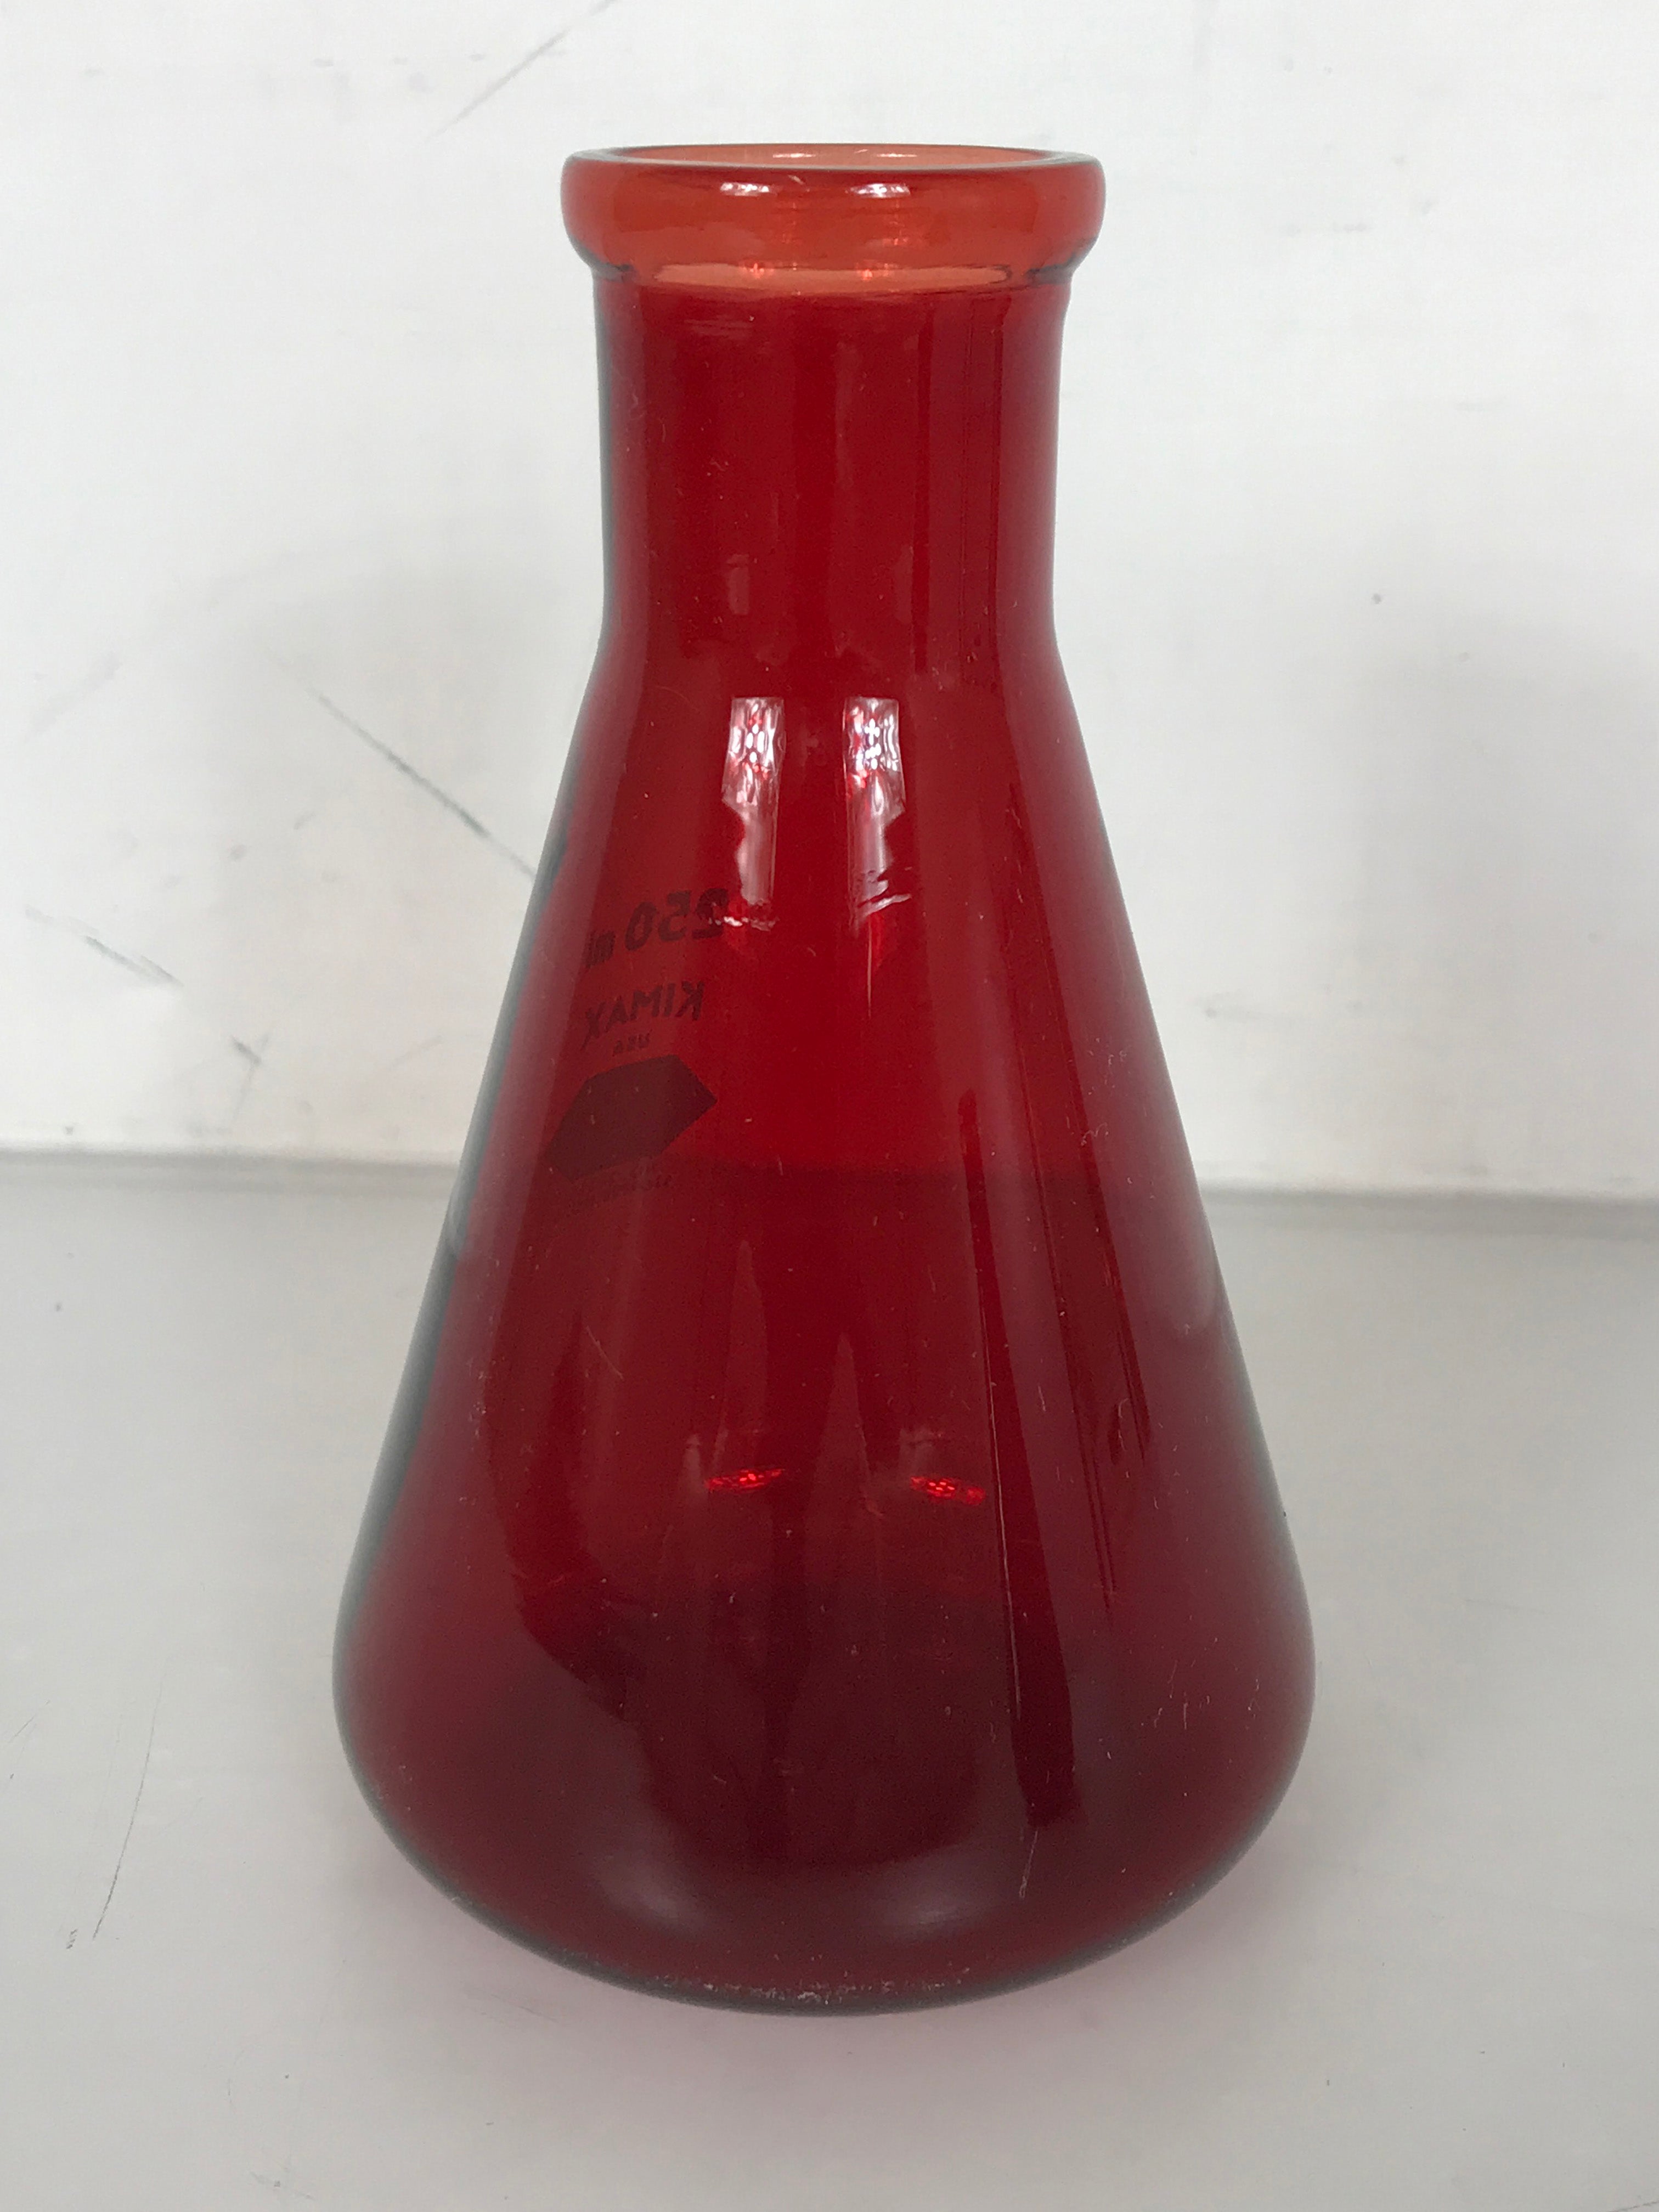 Kimax 250 mL Ruby Red Glass Erlenmeyer Flask No. 26550